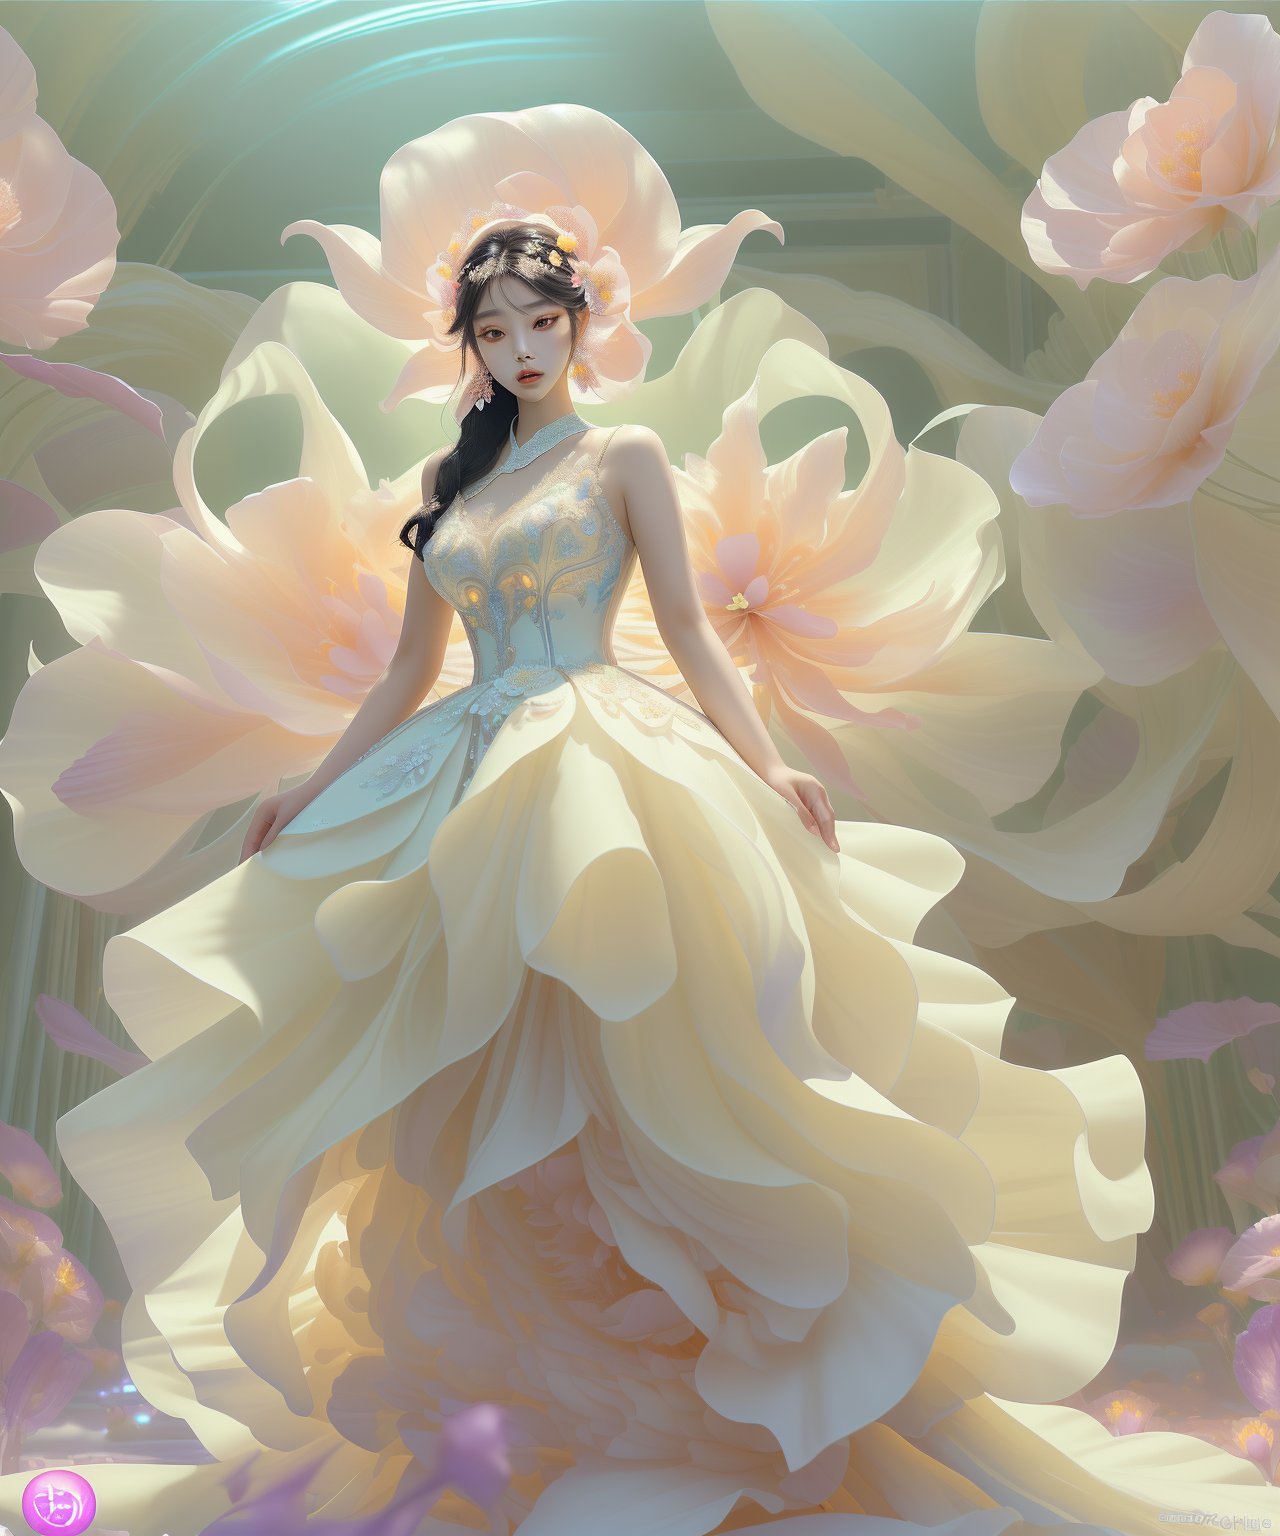 Asian woman with smooth skin, wearing a stunning wedding dress. She is posing in front of a gigantic, vibrantly colorful flower. The scene is bathed in enchanting, dreamlike lighting, enhancing the ethereal beauty of the moment. The atmosphere should evoke a sense of wonder and surreal elegance, highlighting the contrast between the delicate details of the dress and the bold, vivid colors of the flower, lienhoa,Bomi,Detailedface